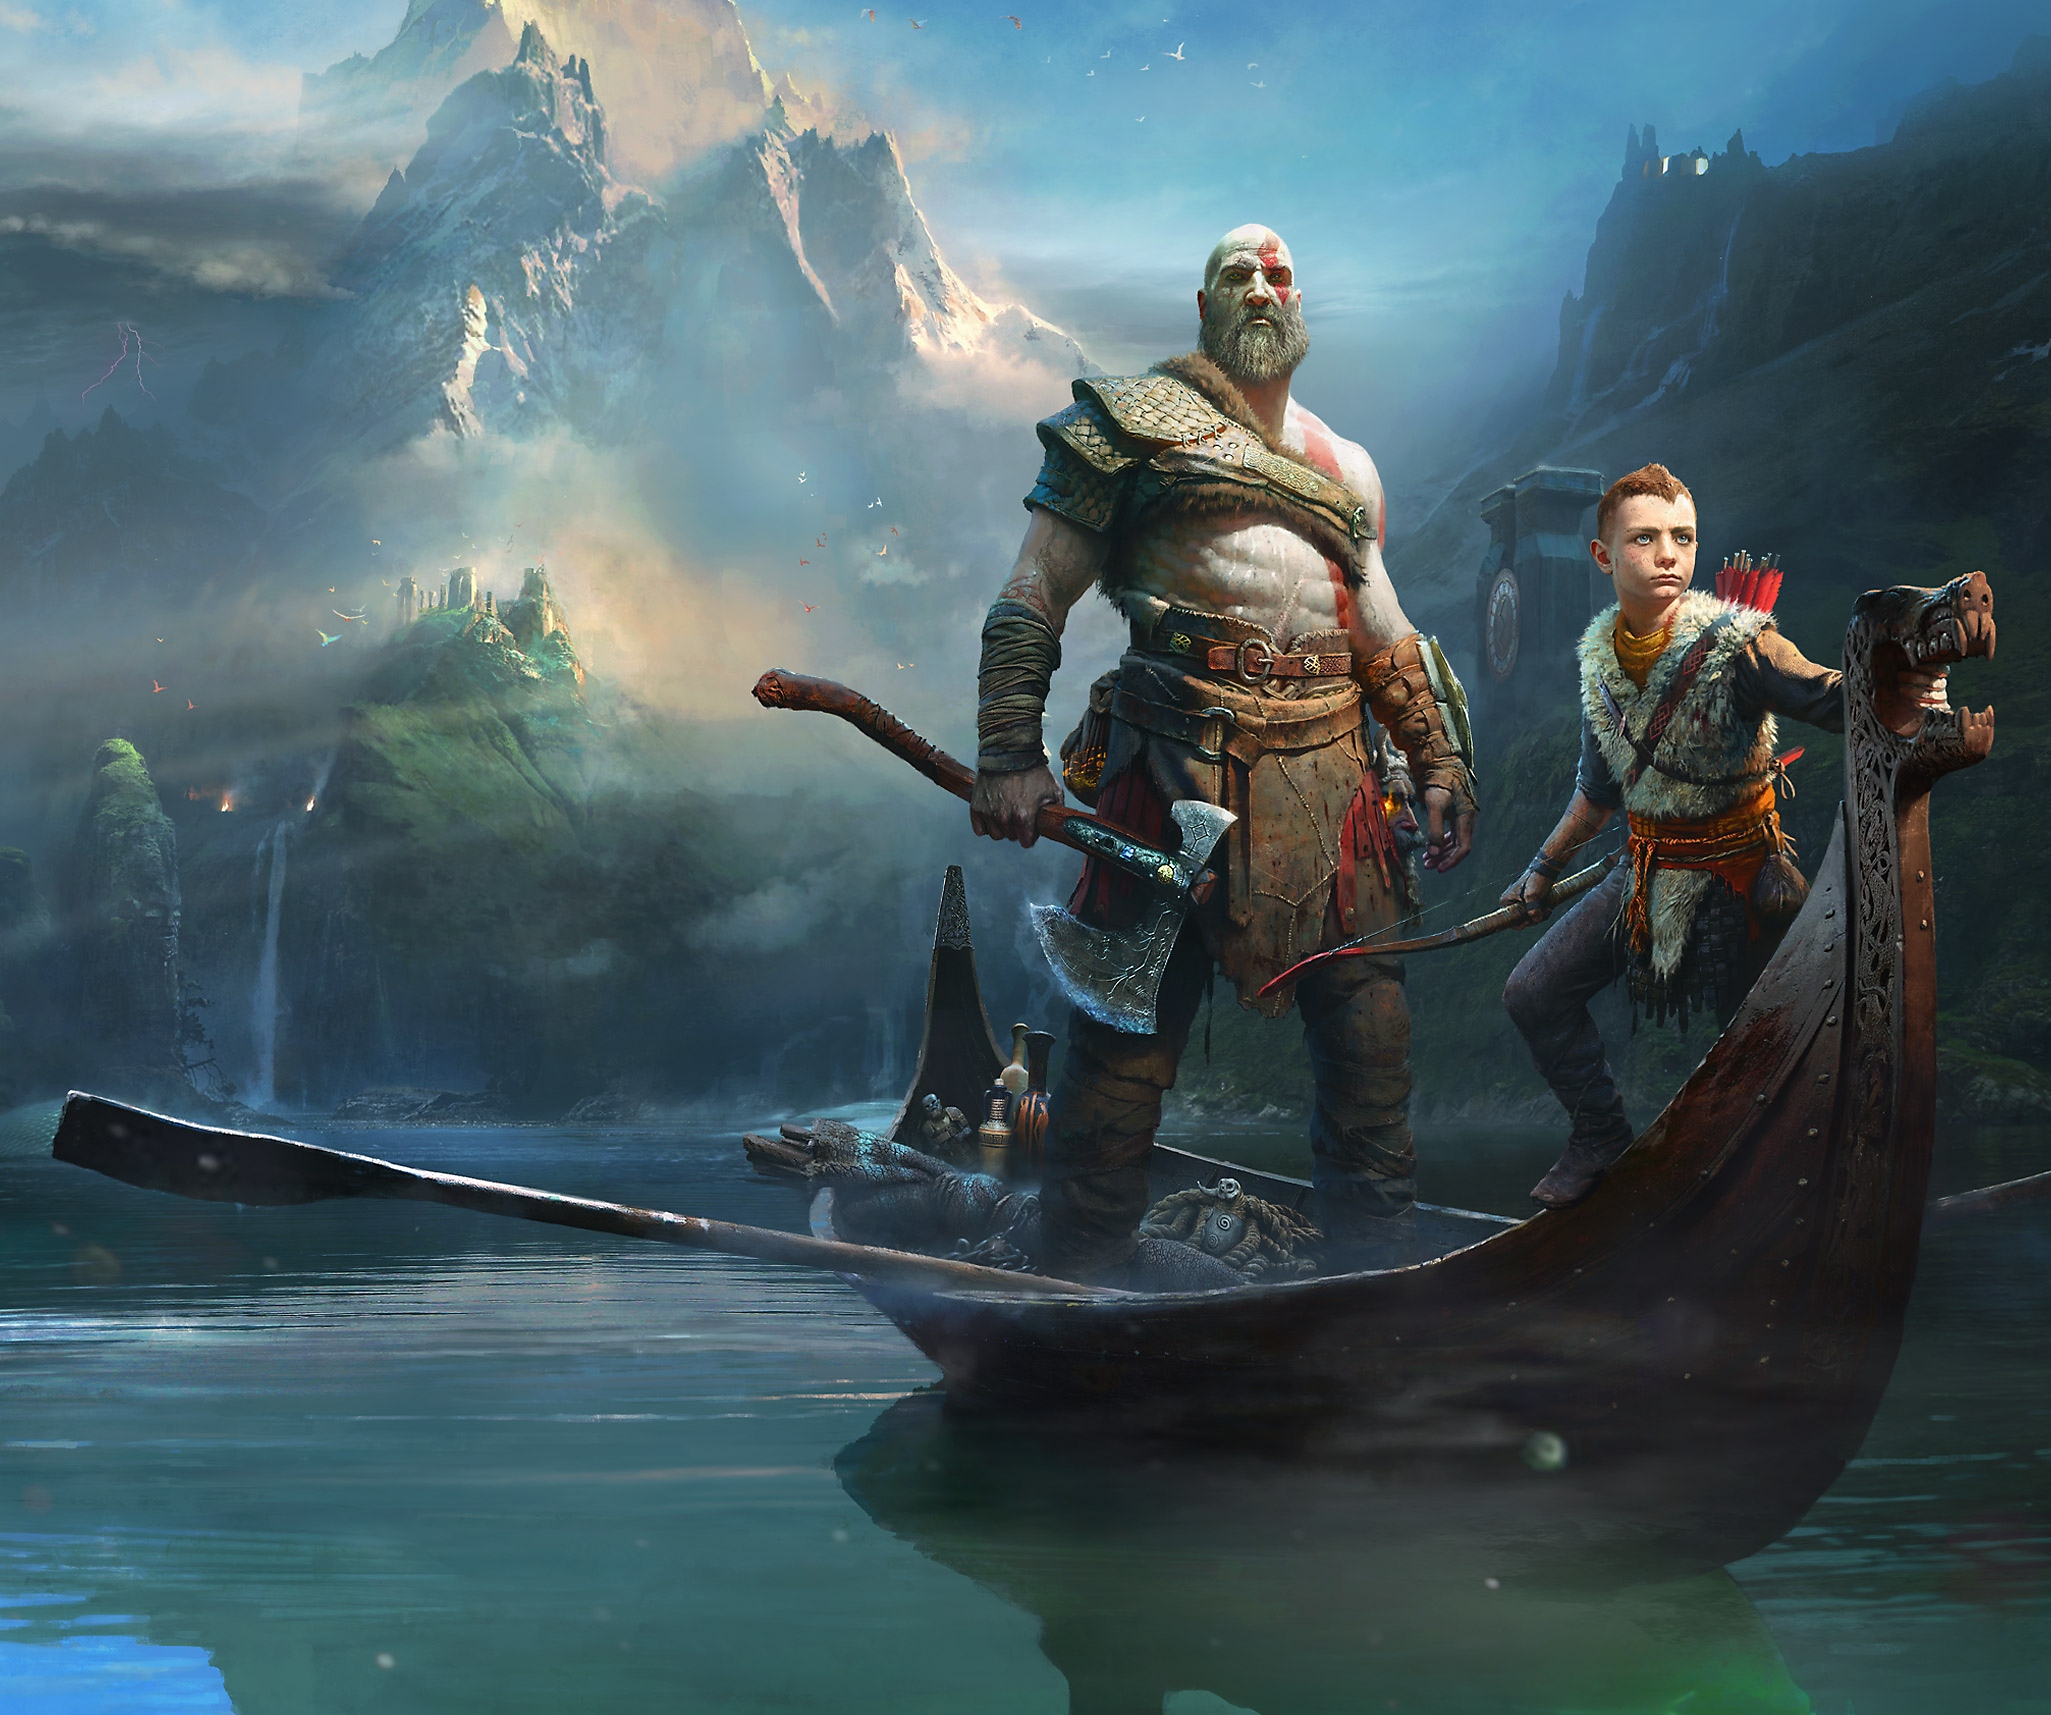 God of War key art featuring Kratos and Atreus aboard a small wood row boat on the Lake of Nine.